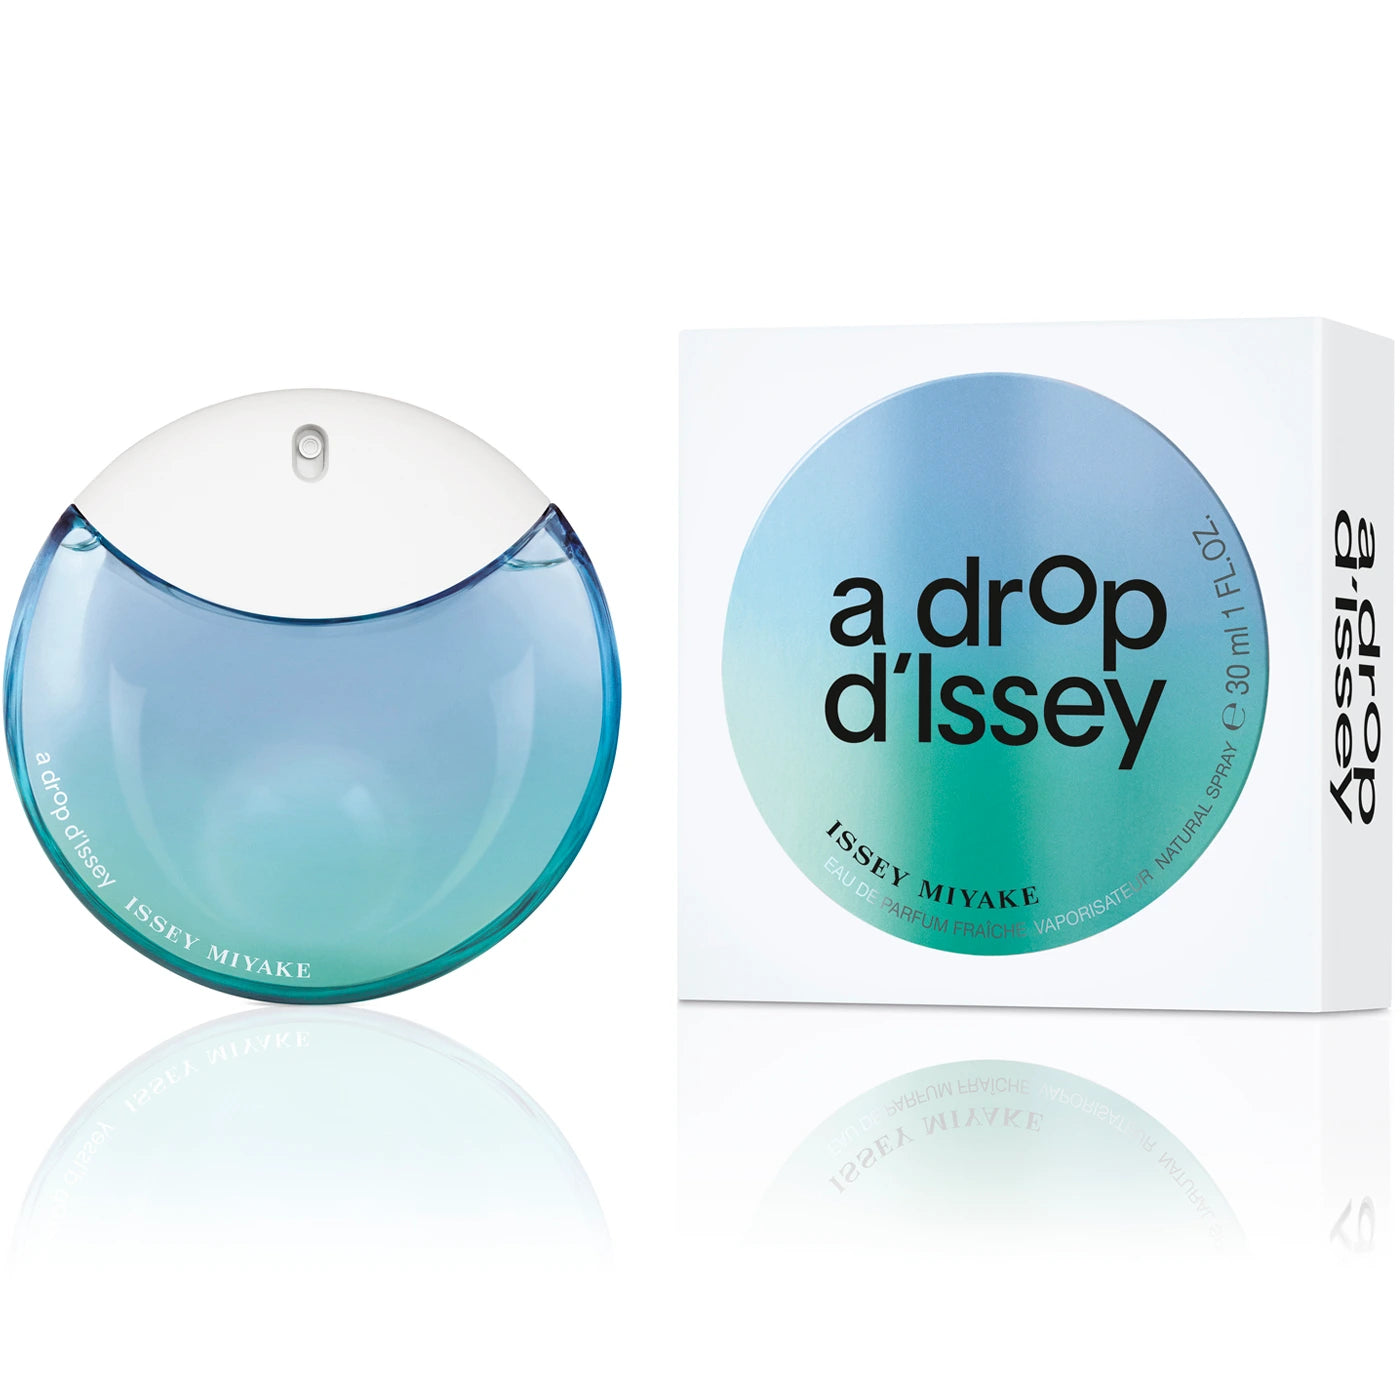 <p class="c-small-font c-margin-bottom-2v description" data-auto="product-description" data-mce-fragment="1" itemprop="description">A Drop d'Issey Eau de Parfum Fraîche, the new opus by the house of Issey Miyake, captures the journey of a raindrop in springtime. This special fragrance is completely unique, being so distant from the norms of classic perfumery. The new Eau de Parfum Fraîche captures the intimate essence of nature as it is reborn each spring, with the dreamlike aura of Issey Miyake to boot. Ane Ayo, perfumer at Firmenich, dreamed up this unprecedented springtime rain accord, that singular flash of freshness combining the pure transparency of a drop of water with its captivating mineral dimension. Within the scent, this drop encounters a profusion of colorful flowers, like a rush of damp petals including the splendid lilac accord intertwined with damask rose. It suggests a new, tender and fresh floral signature. The journey of this poetic drop comes to an end as it rests on woods: crisp cedar and a creamy sandalwood accord, which reveals its full-bodied character. The drop-shaped A Drop d'Issey bottle is back to house this traveling raindrop.</p>
<ul class="c-small-font c-margin-bottom-5v bullets-section" data-auto="product-description-bullets" data-mce-fragment="1">
<li data-mce-fragment="1">FRAGRANCE FAMILY: Aquatic Floral</li>
<li data-mce-fragment="1">KEY NOTES: Top: Rain Accord; Middle: Lilac Accord; Base: Sandalwood Accord</li>
</ul>